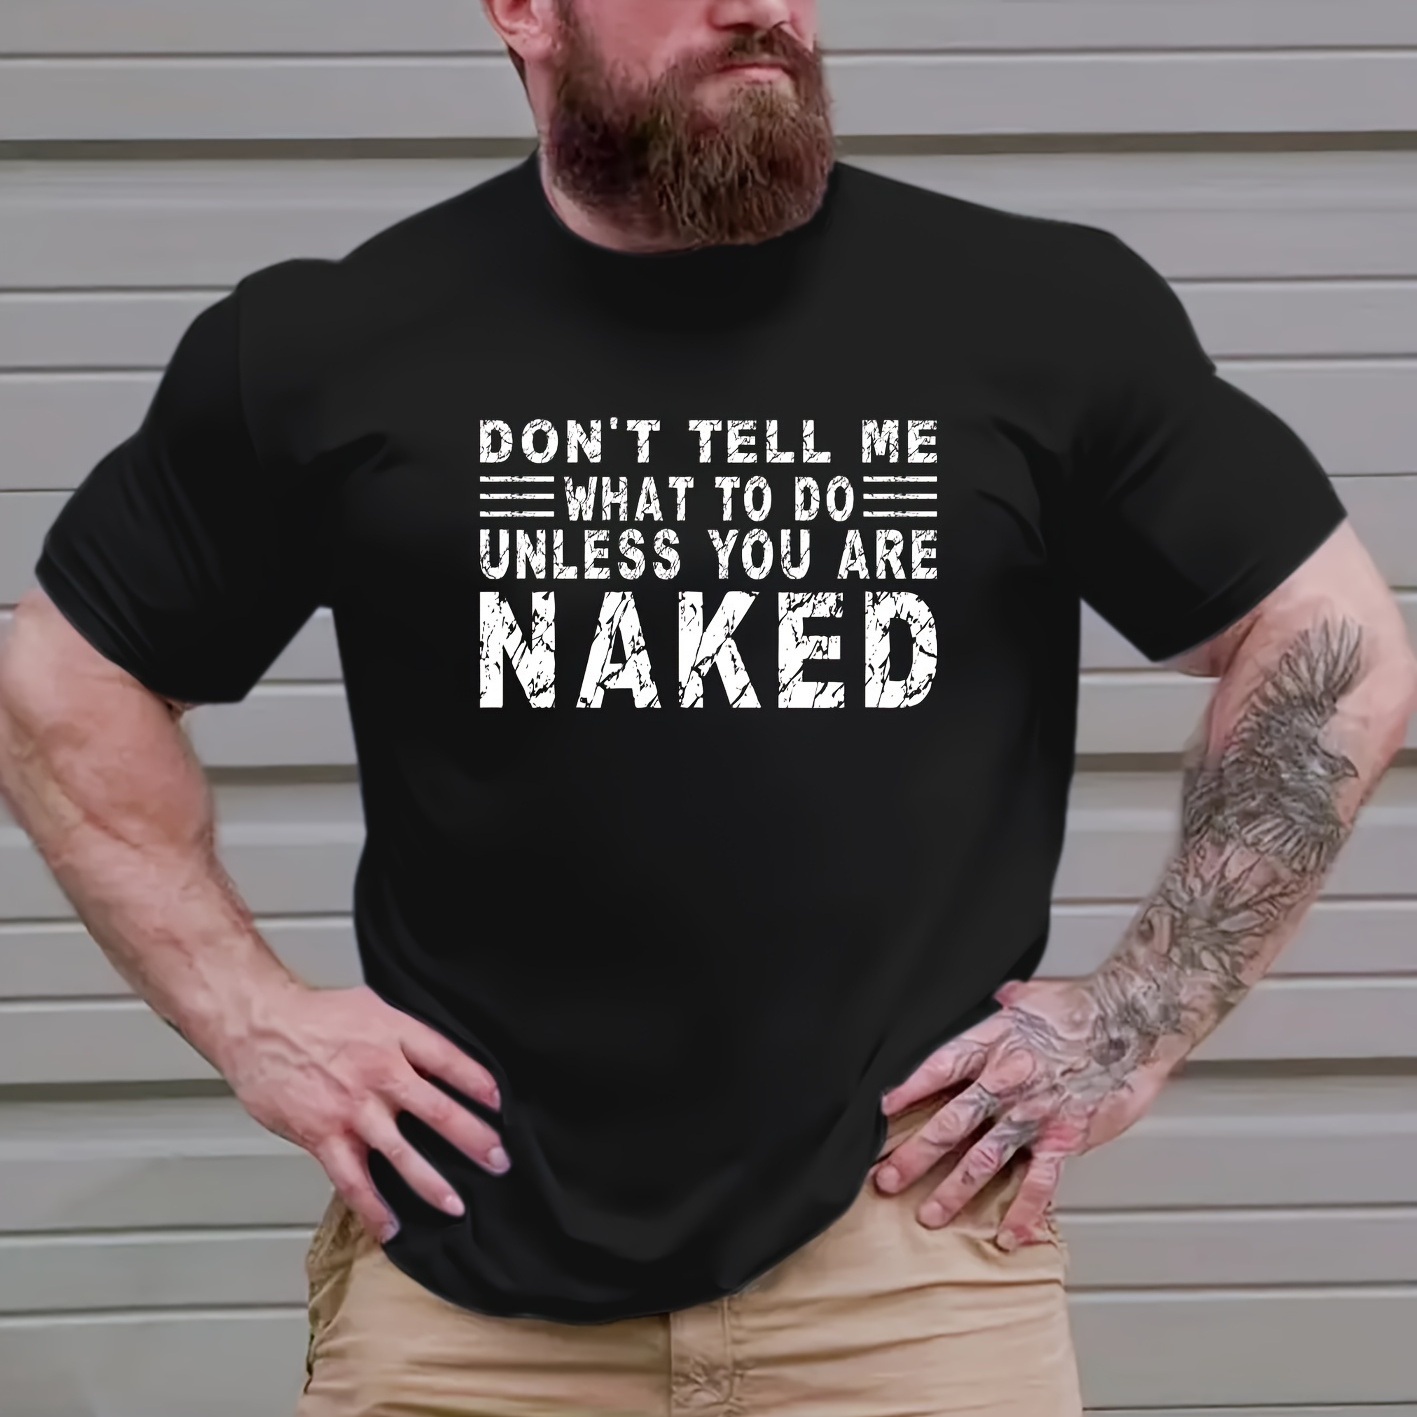 

Plus Size T-shirt For Men, "naked" Graphic Print Tees, Casual Fashion Clothing For Males